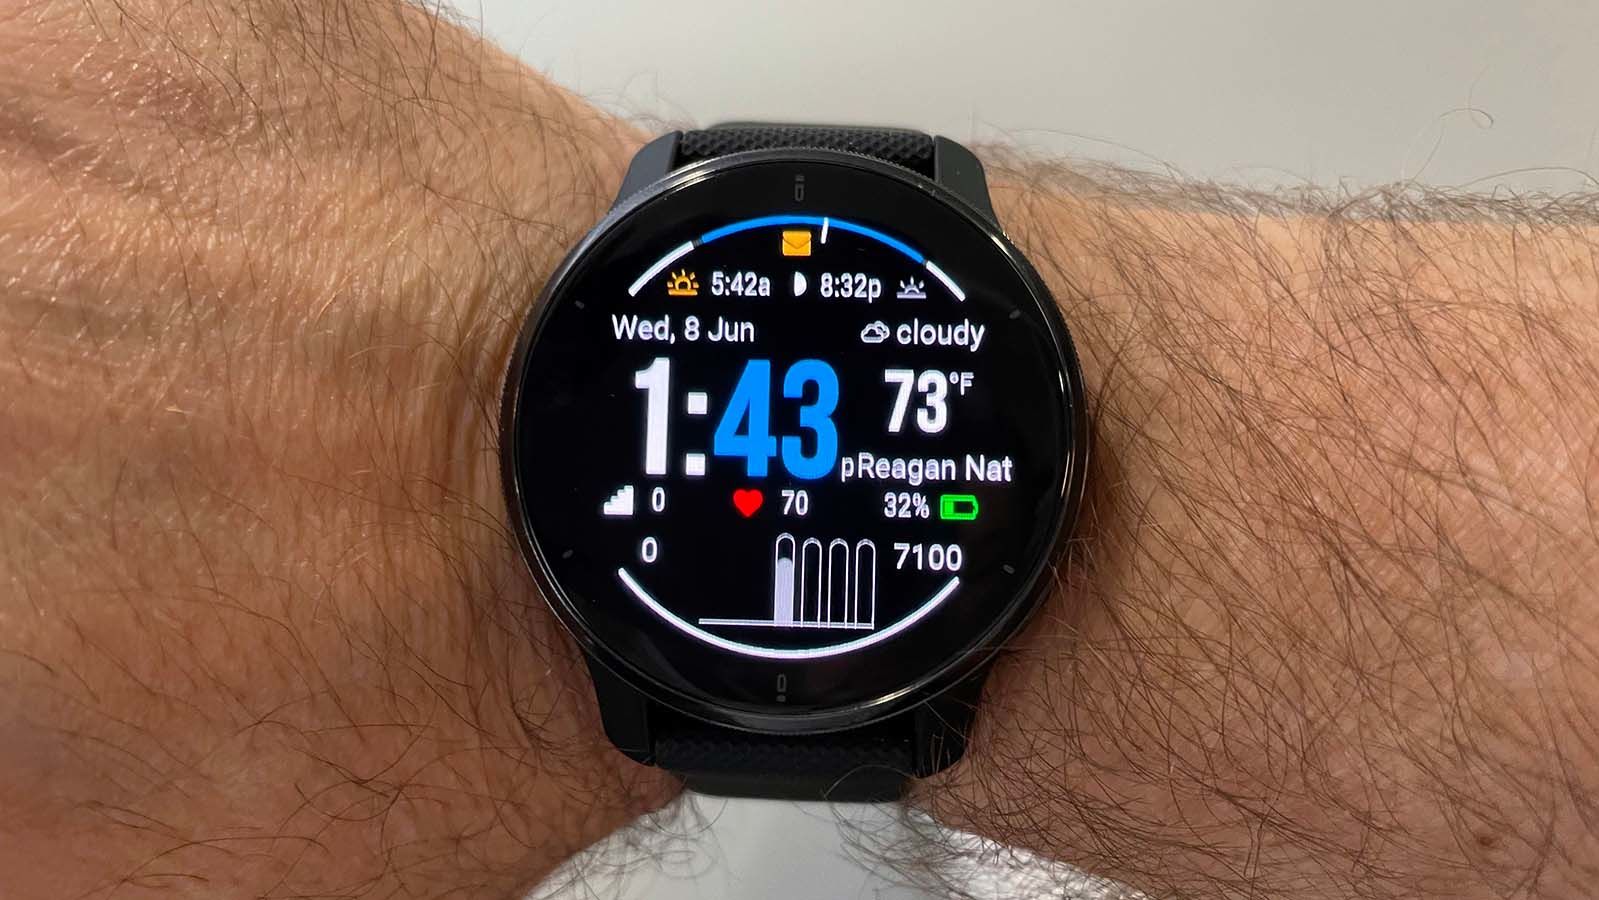 Garmin Vivoactive 5 vs Venu 3: Which is best for you? - Android